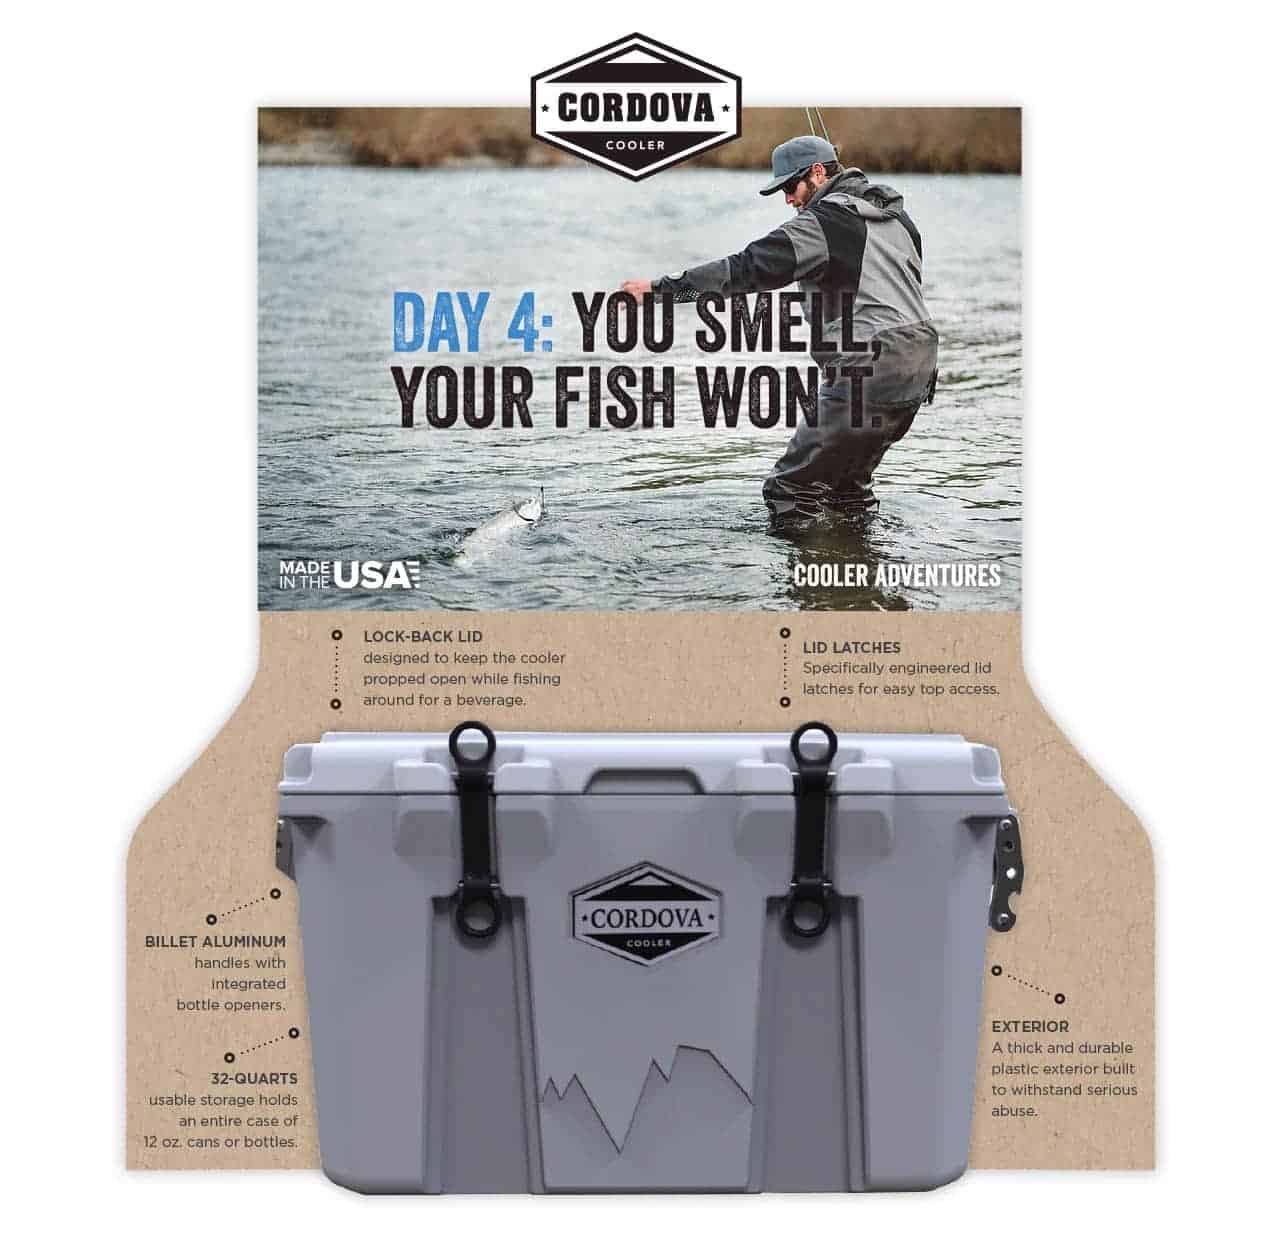 Print | Cordova Coolers | Case Study | Commit Agency